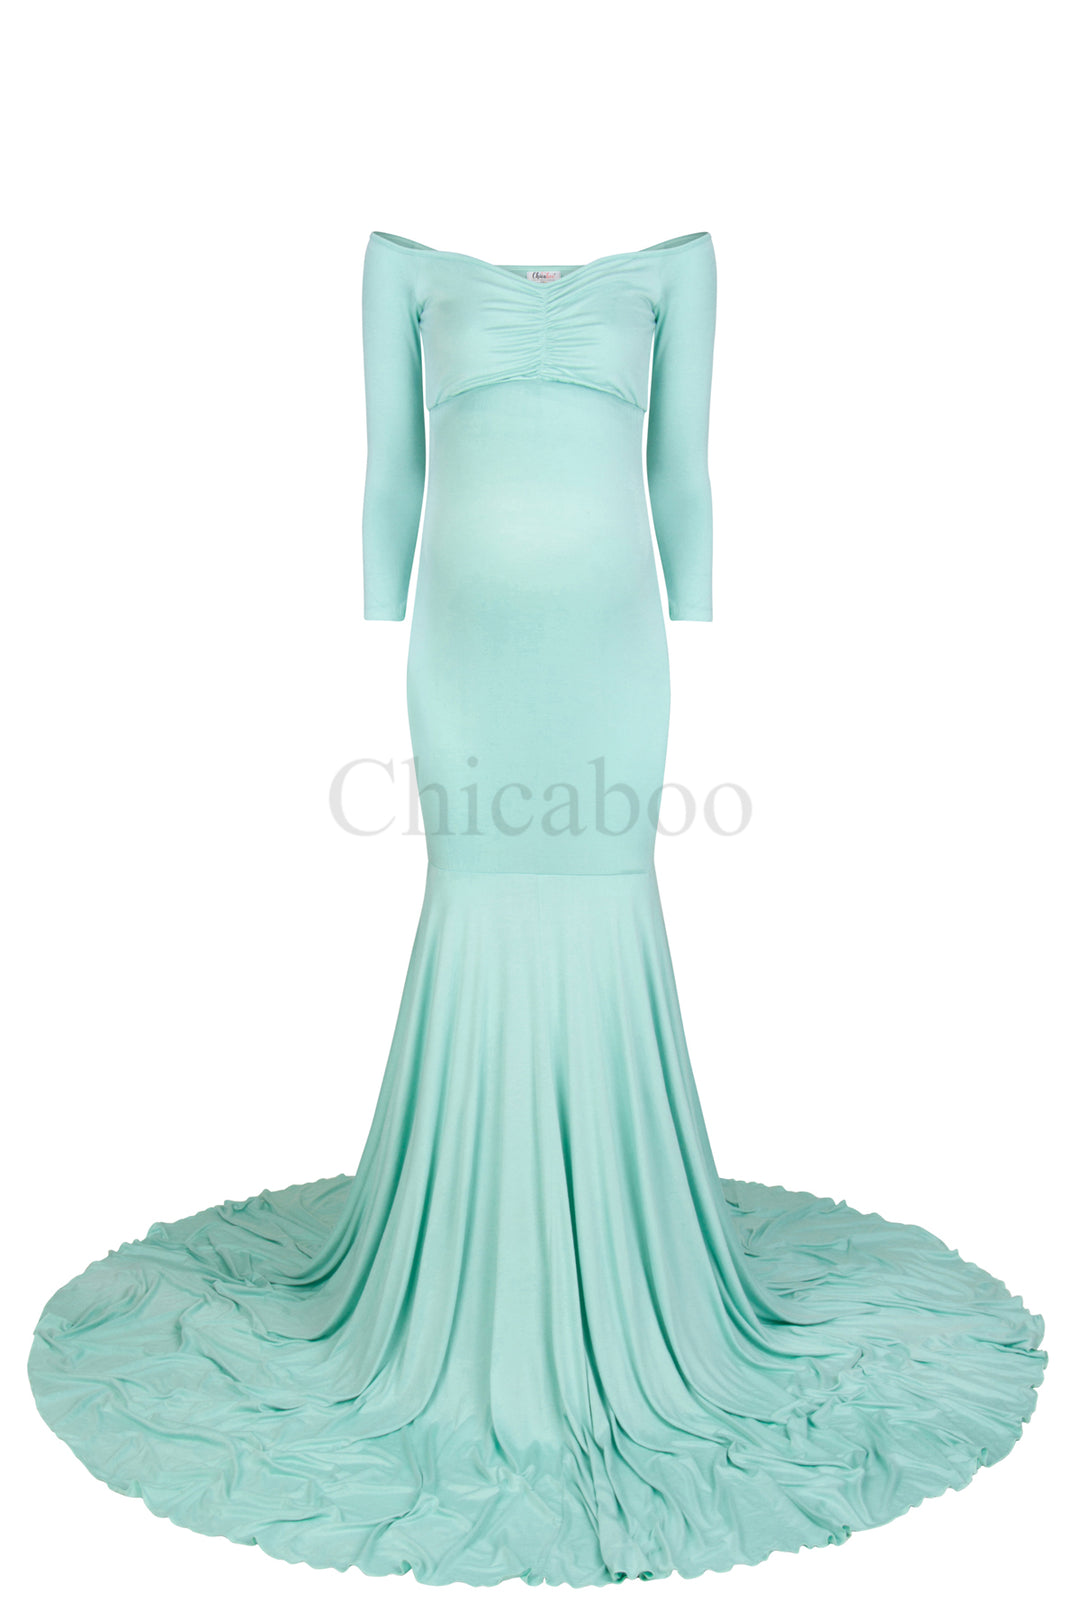 Sea Spray Serena Maternity Photoshoot Gown One-Size